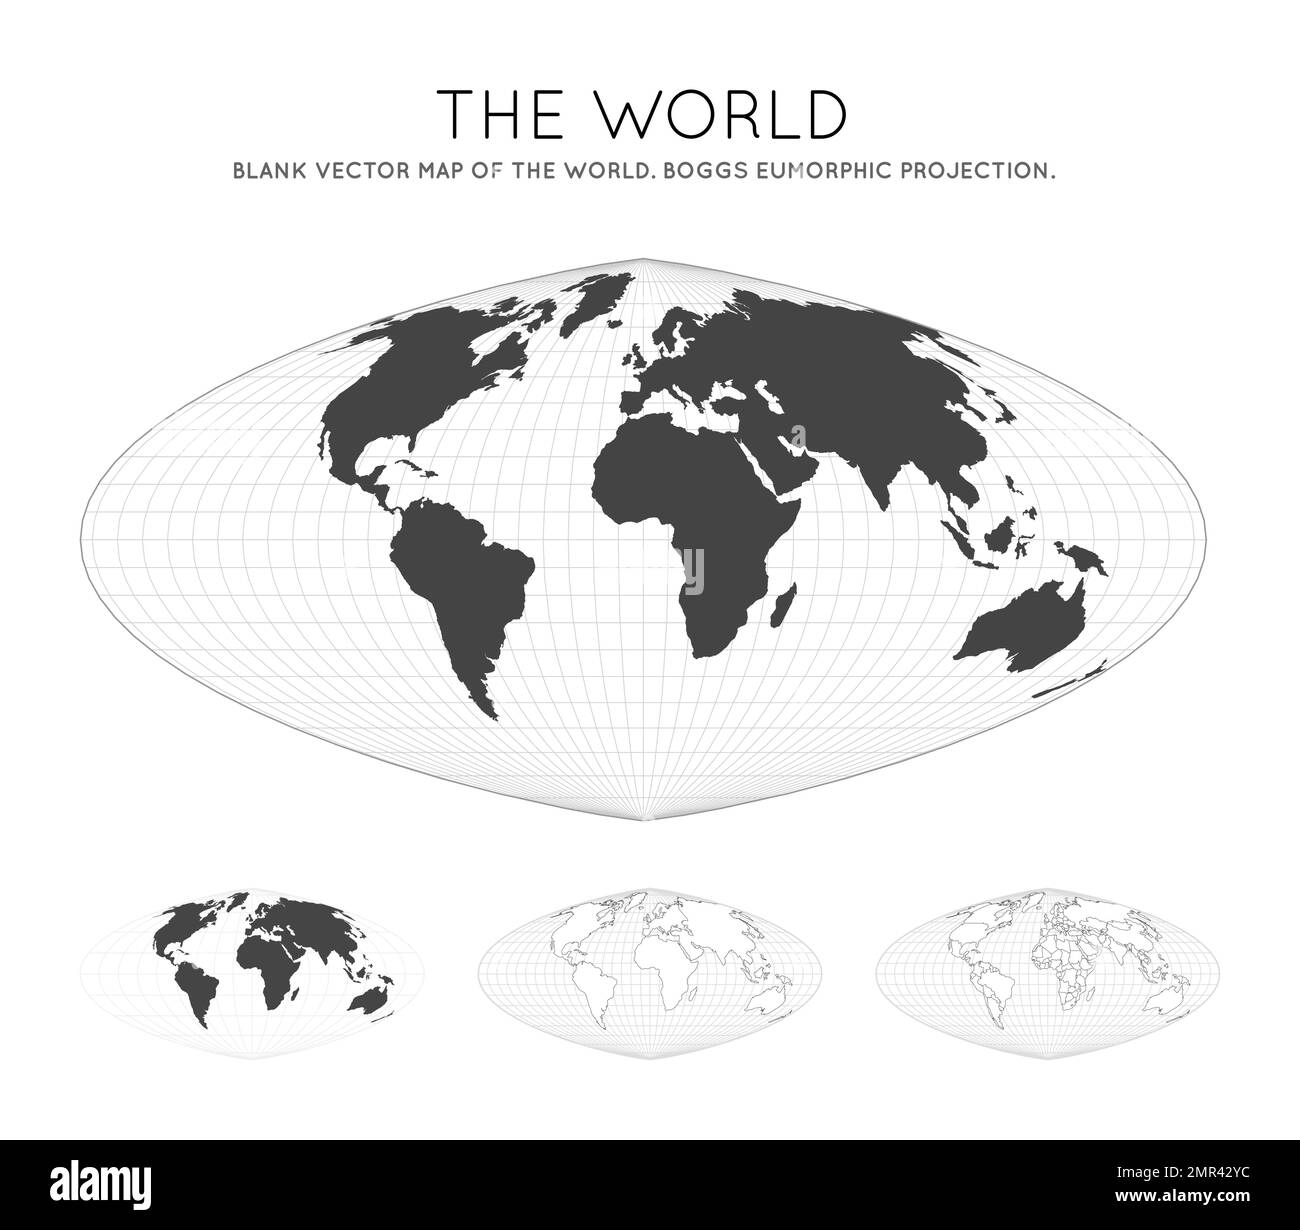 Map of The World. Boggs eumorphic projection. Globe with latitude and longitude lines. World map on meridians and parallels background. Vector illustr Stock Vector